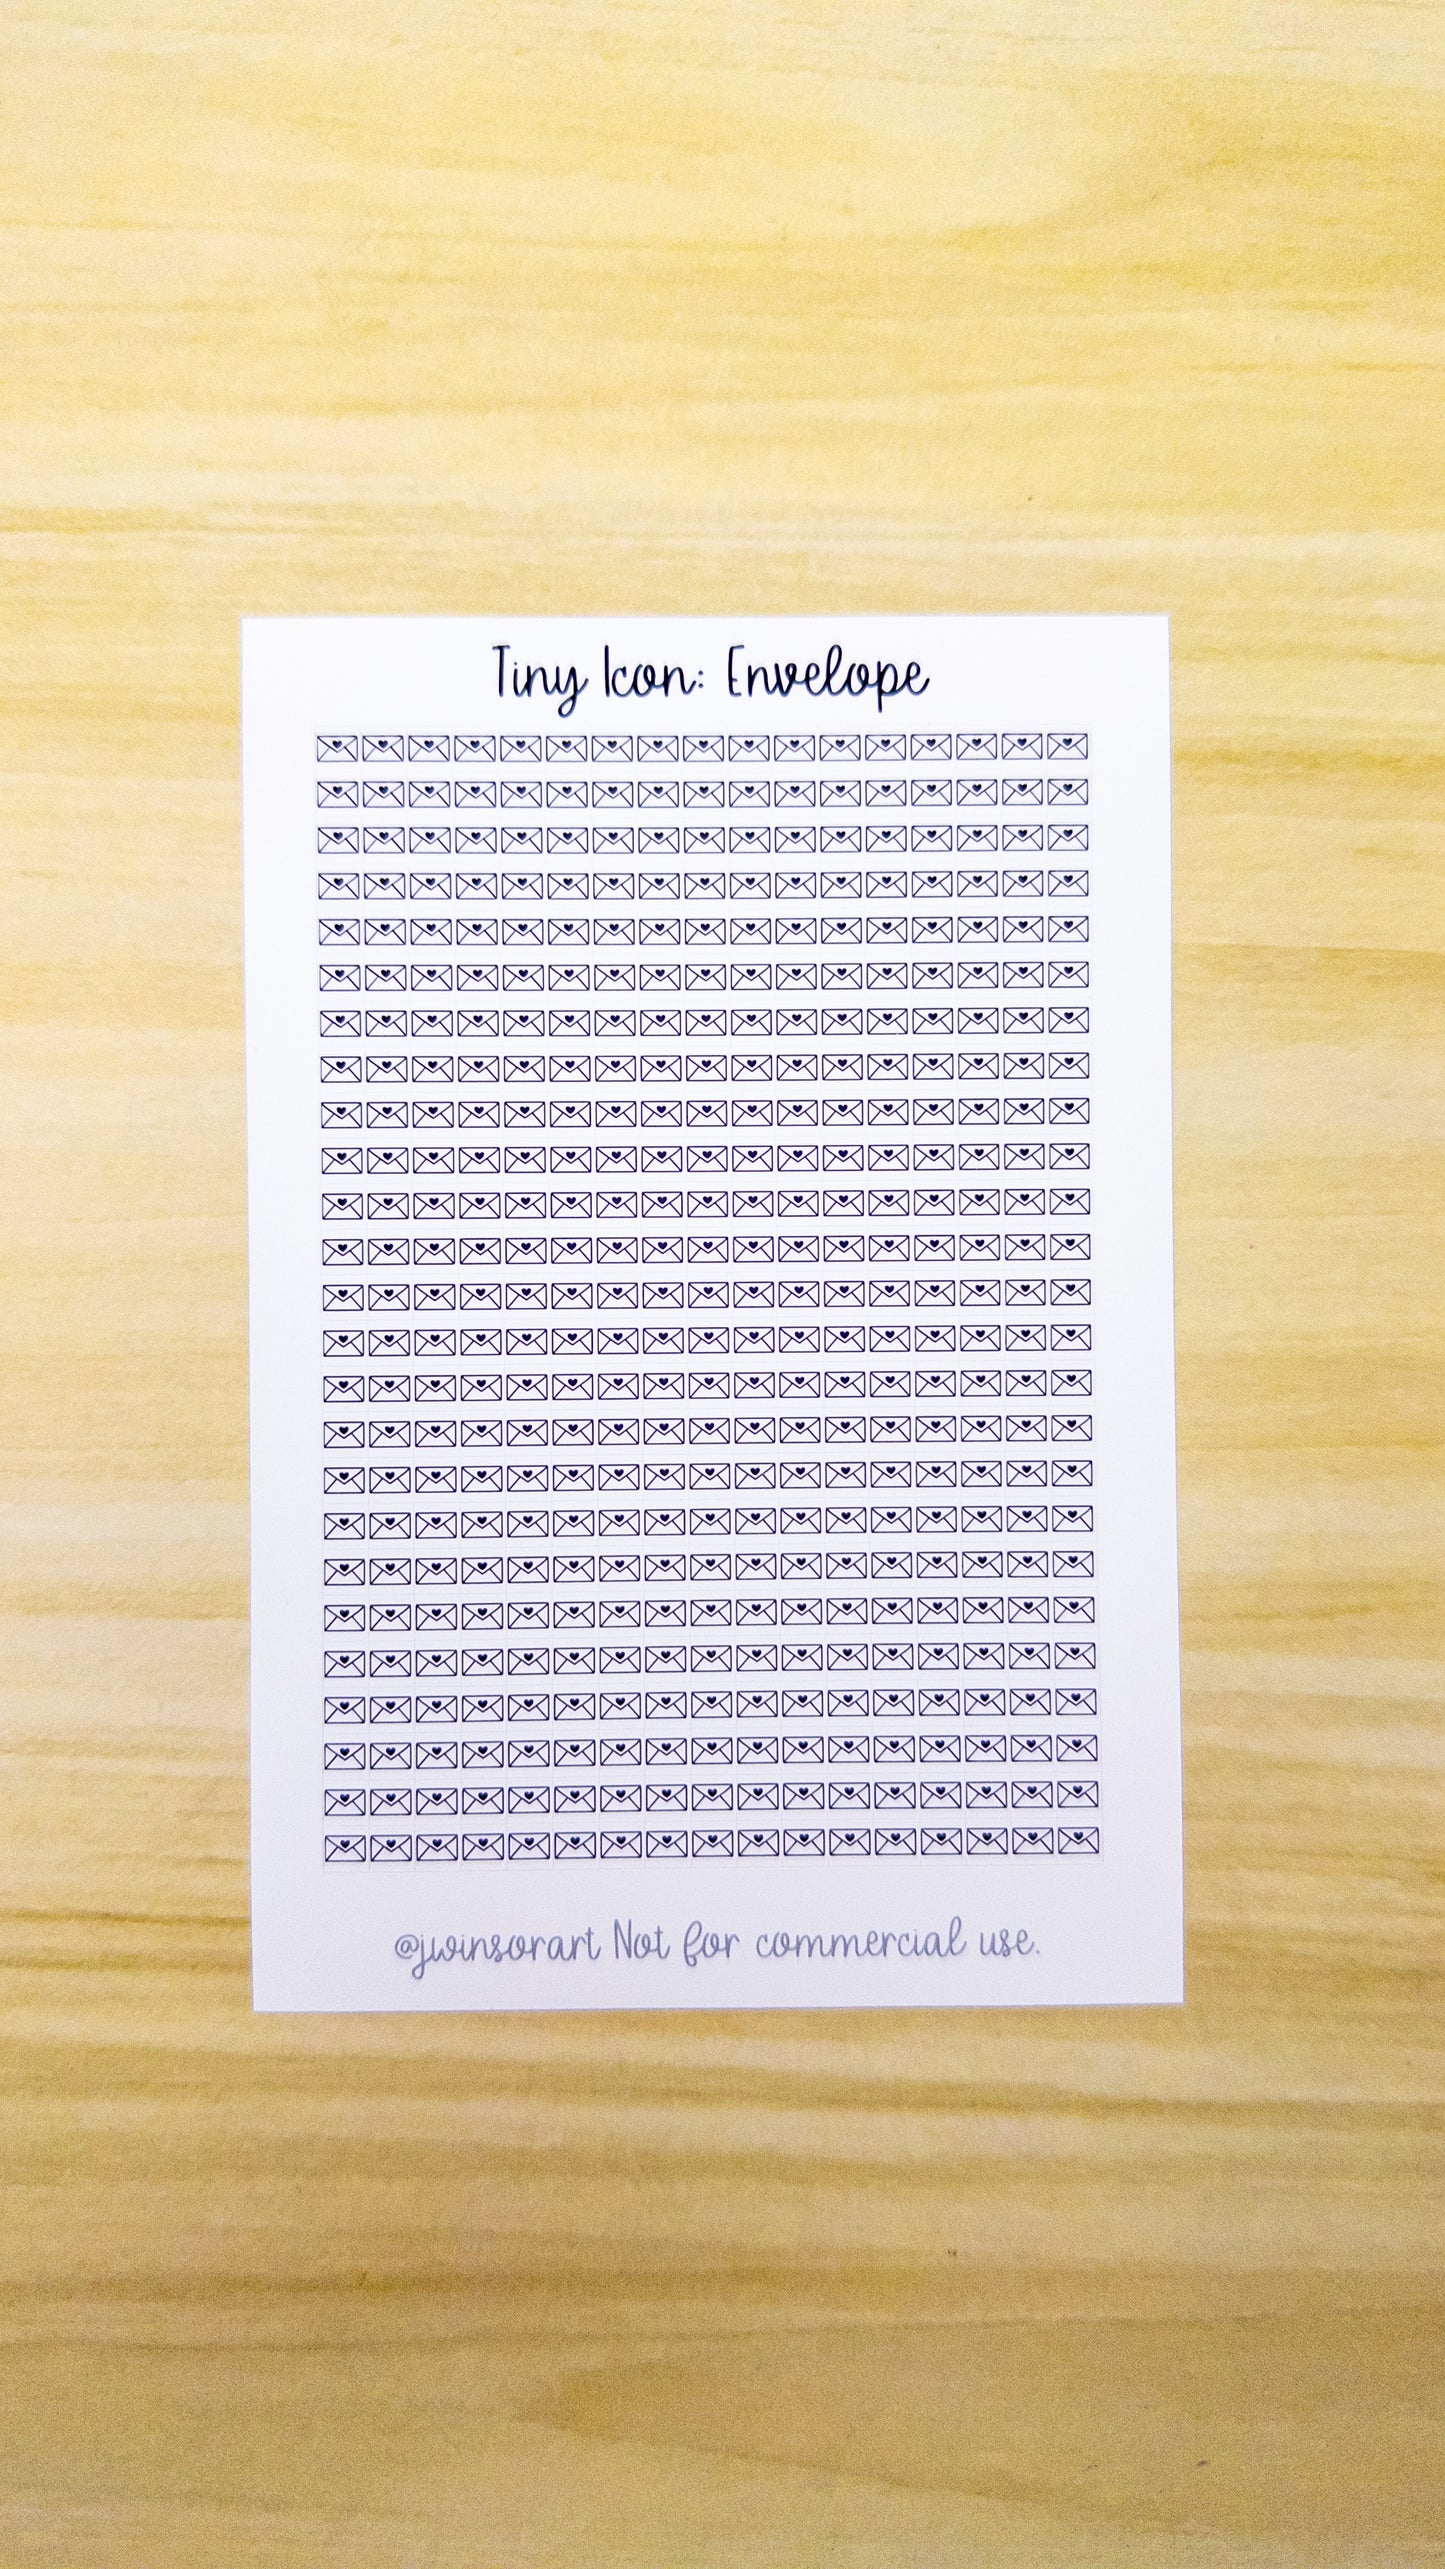 Tiny Icon: Envelope Mail Doodle Functional Sticker Sheet 5 mm Square Email Bujo Cute Line Art Style